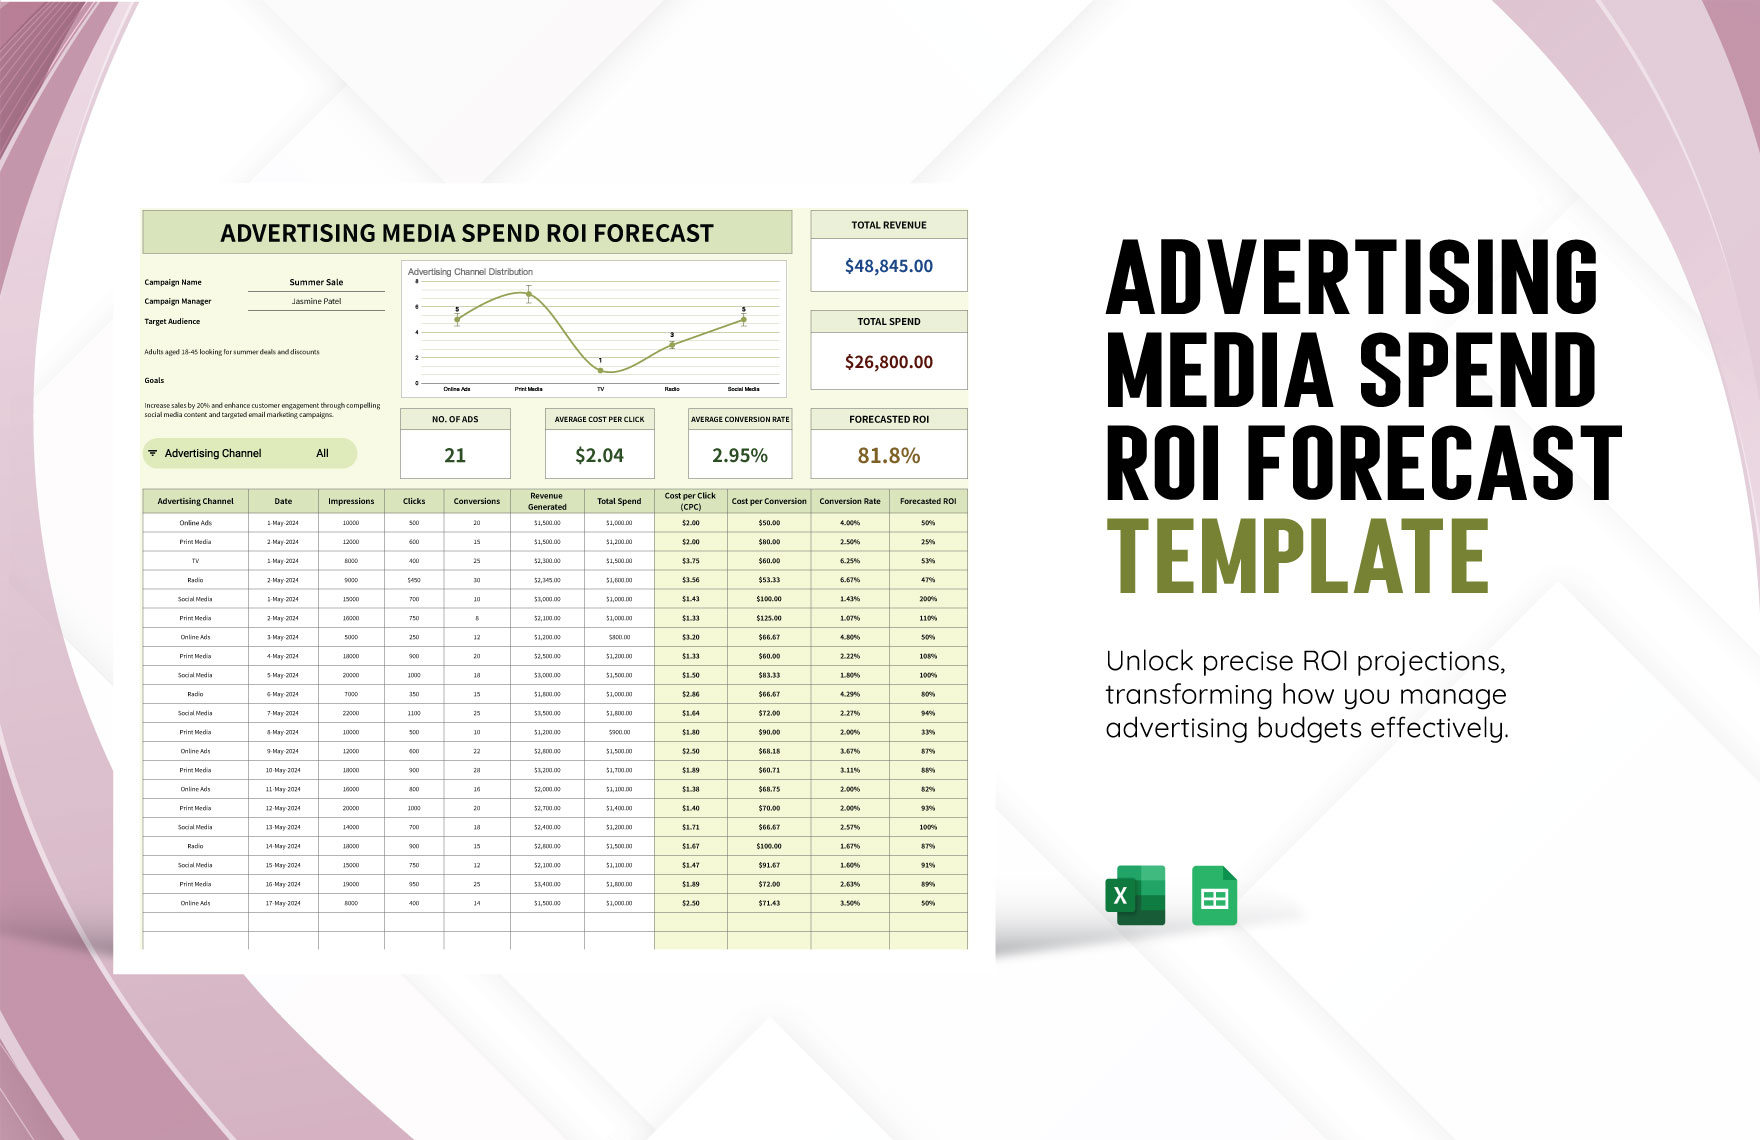 Advertising Media Spend ROI Forecast Template in Excel, Google Sheets